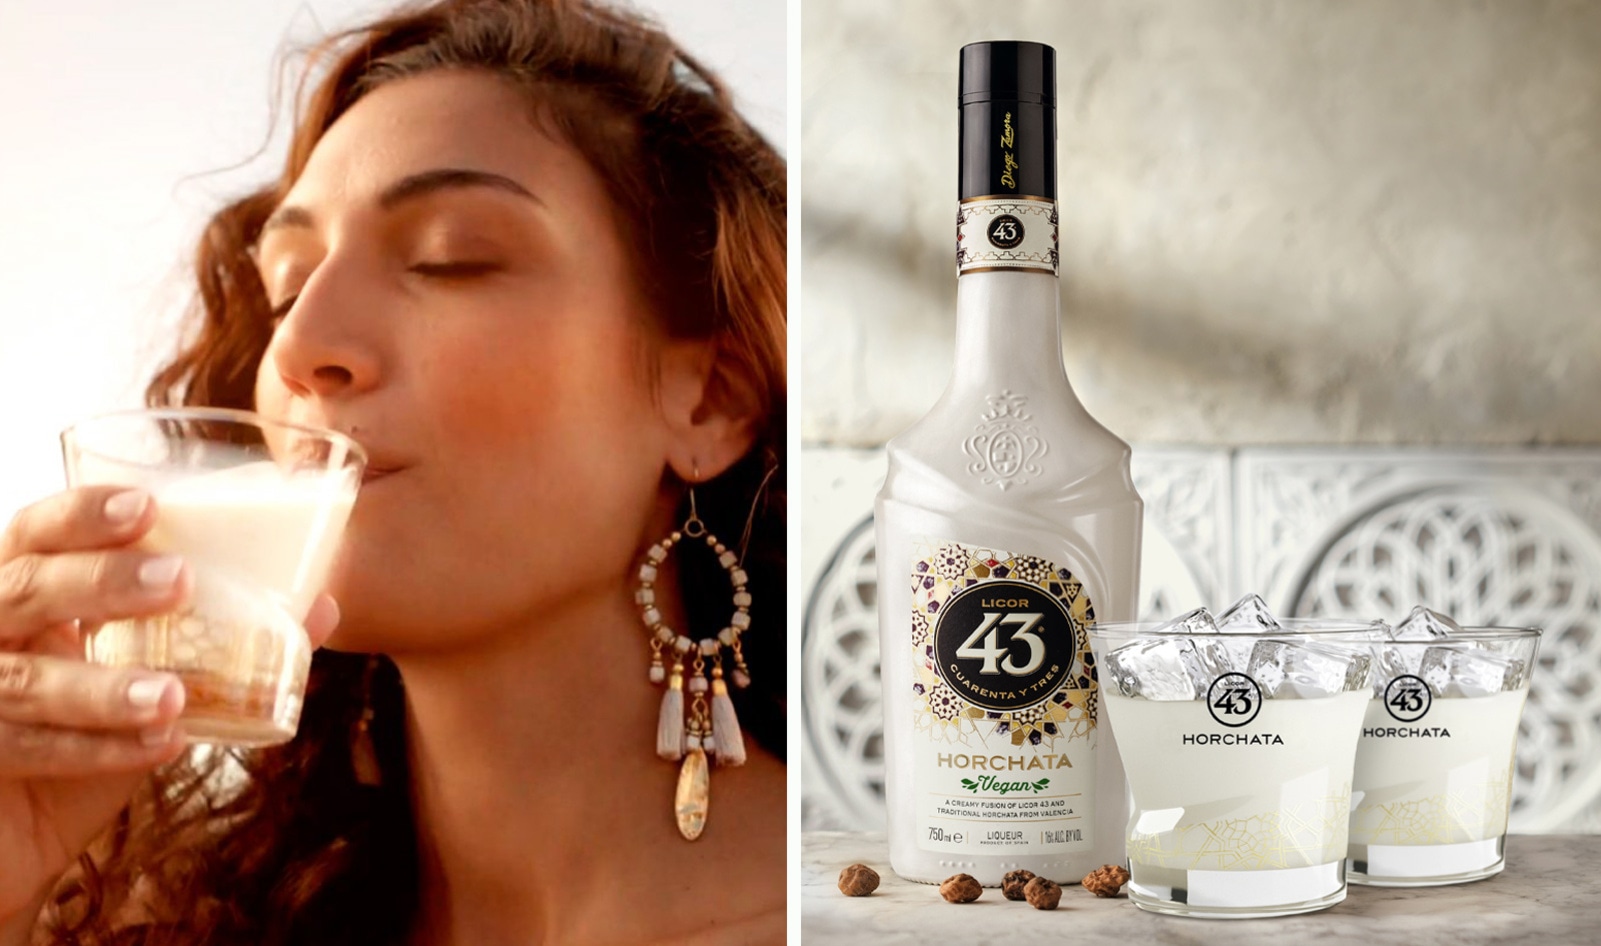 Vegan Horchata Cream Liqueur Just Launched in the US